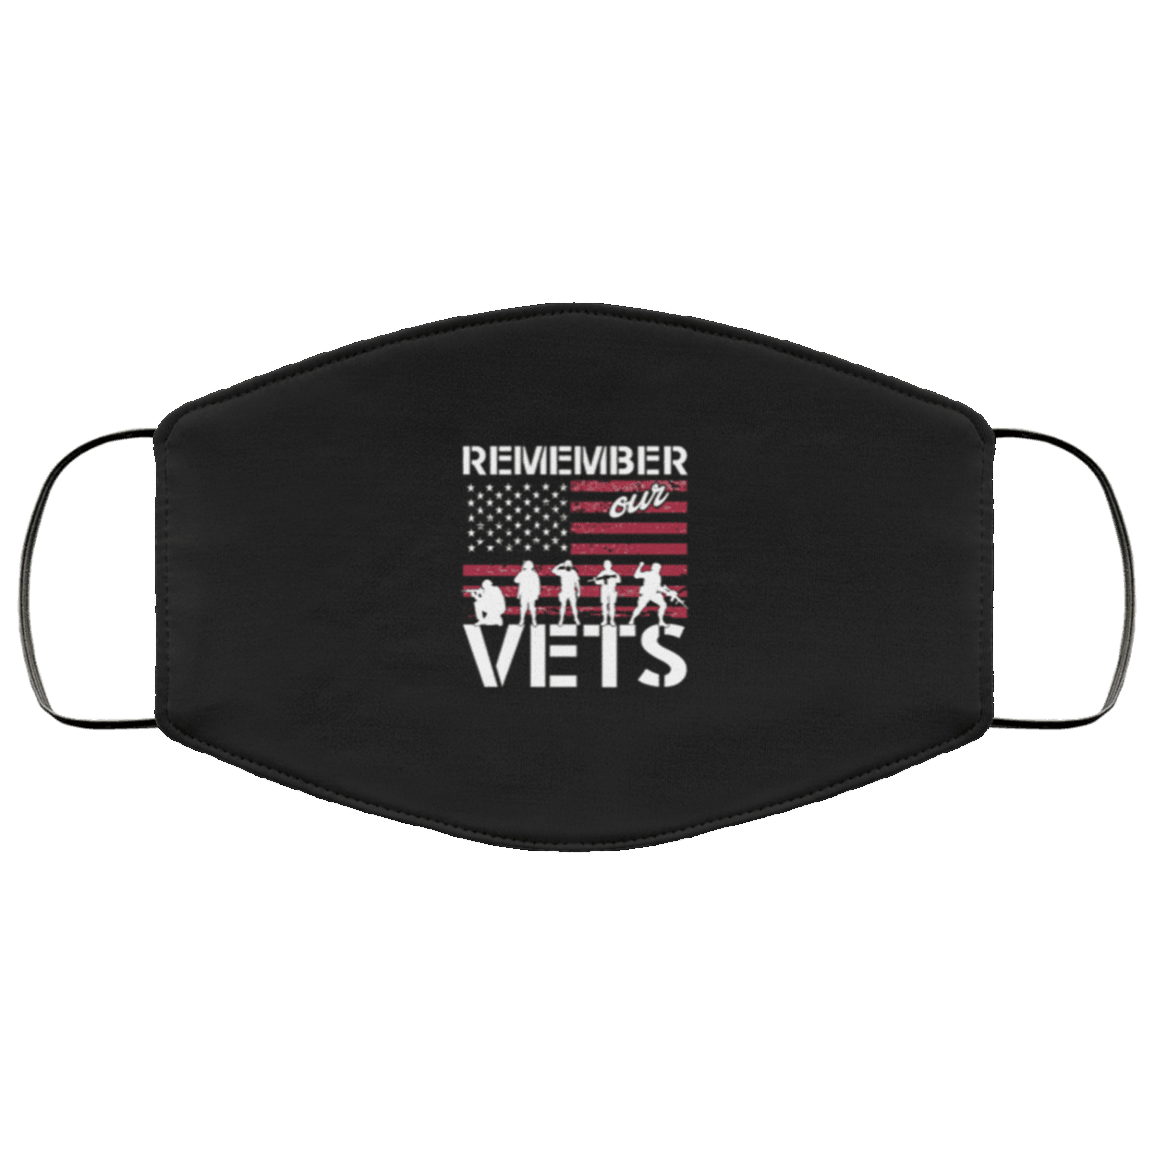 Designs by MyUtopia Shout Out:Remember Our Vets US Flag Adult Fabric Face Mask with Elastic Ear Loops,3 Layer Fabric Face Mask / Black / Adult,Fabric Face Mask